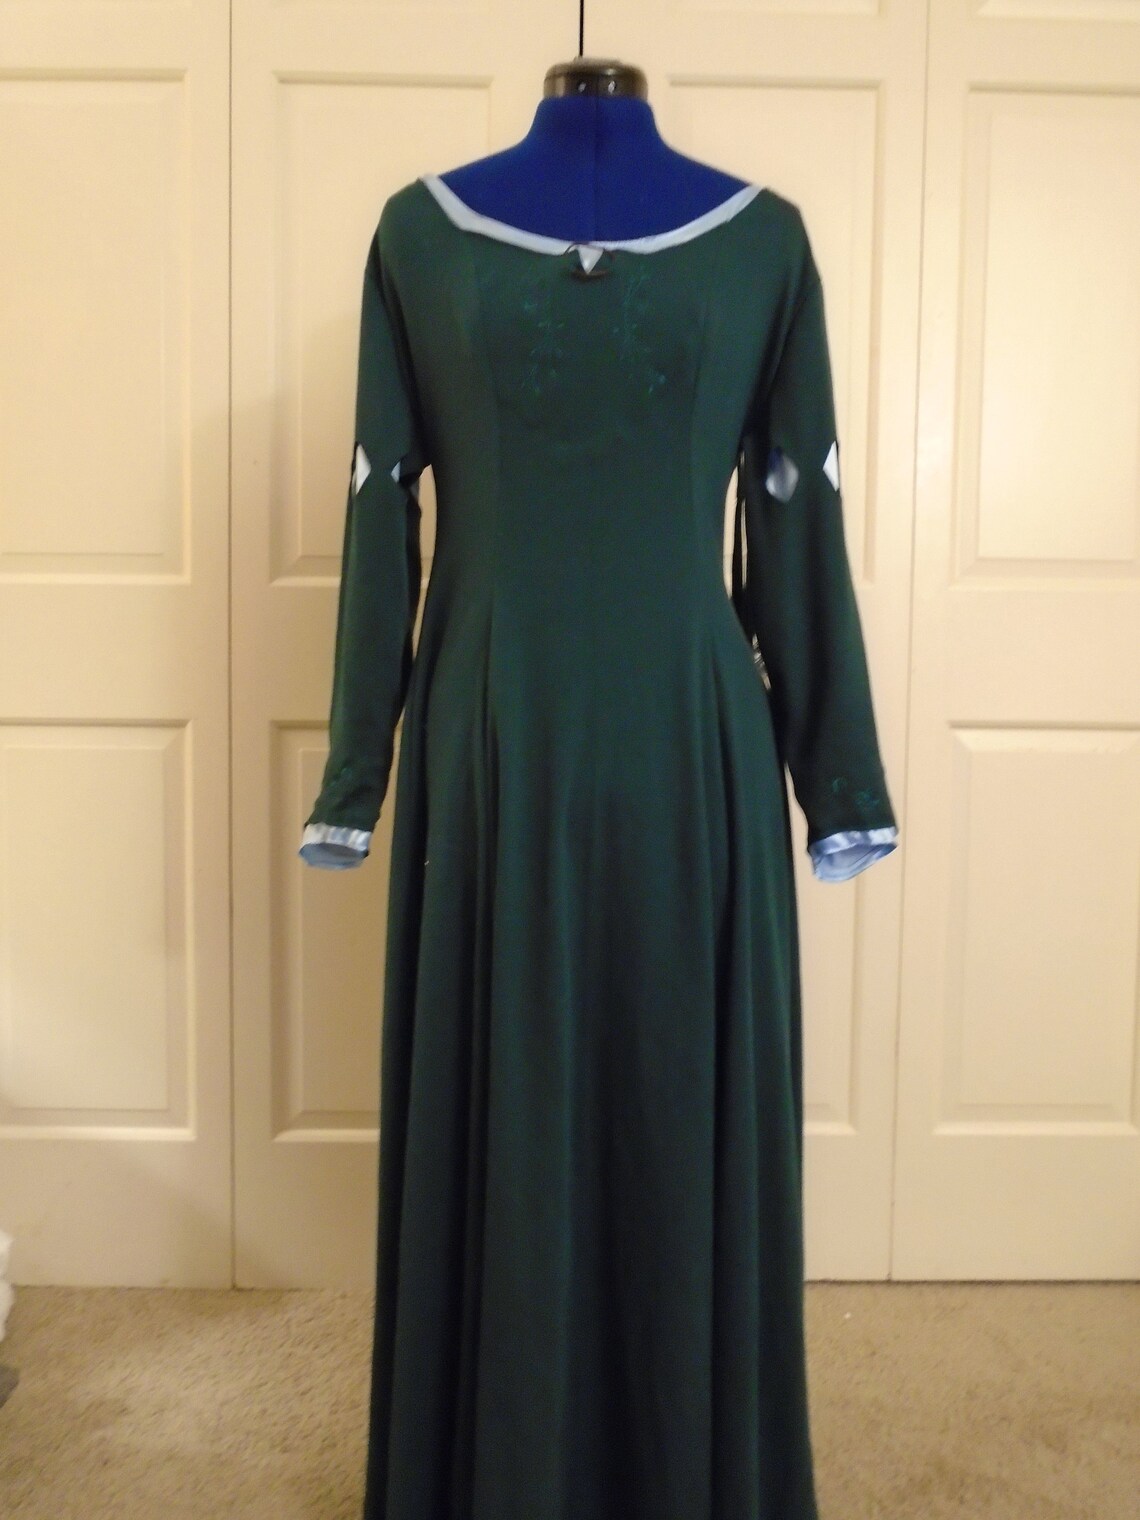 Susan Pevensie's Green Archery Dress and Cloak | Etsy